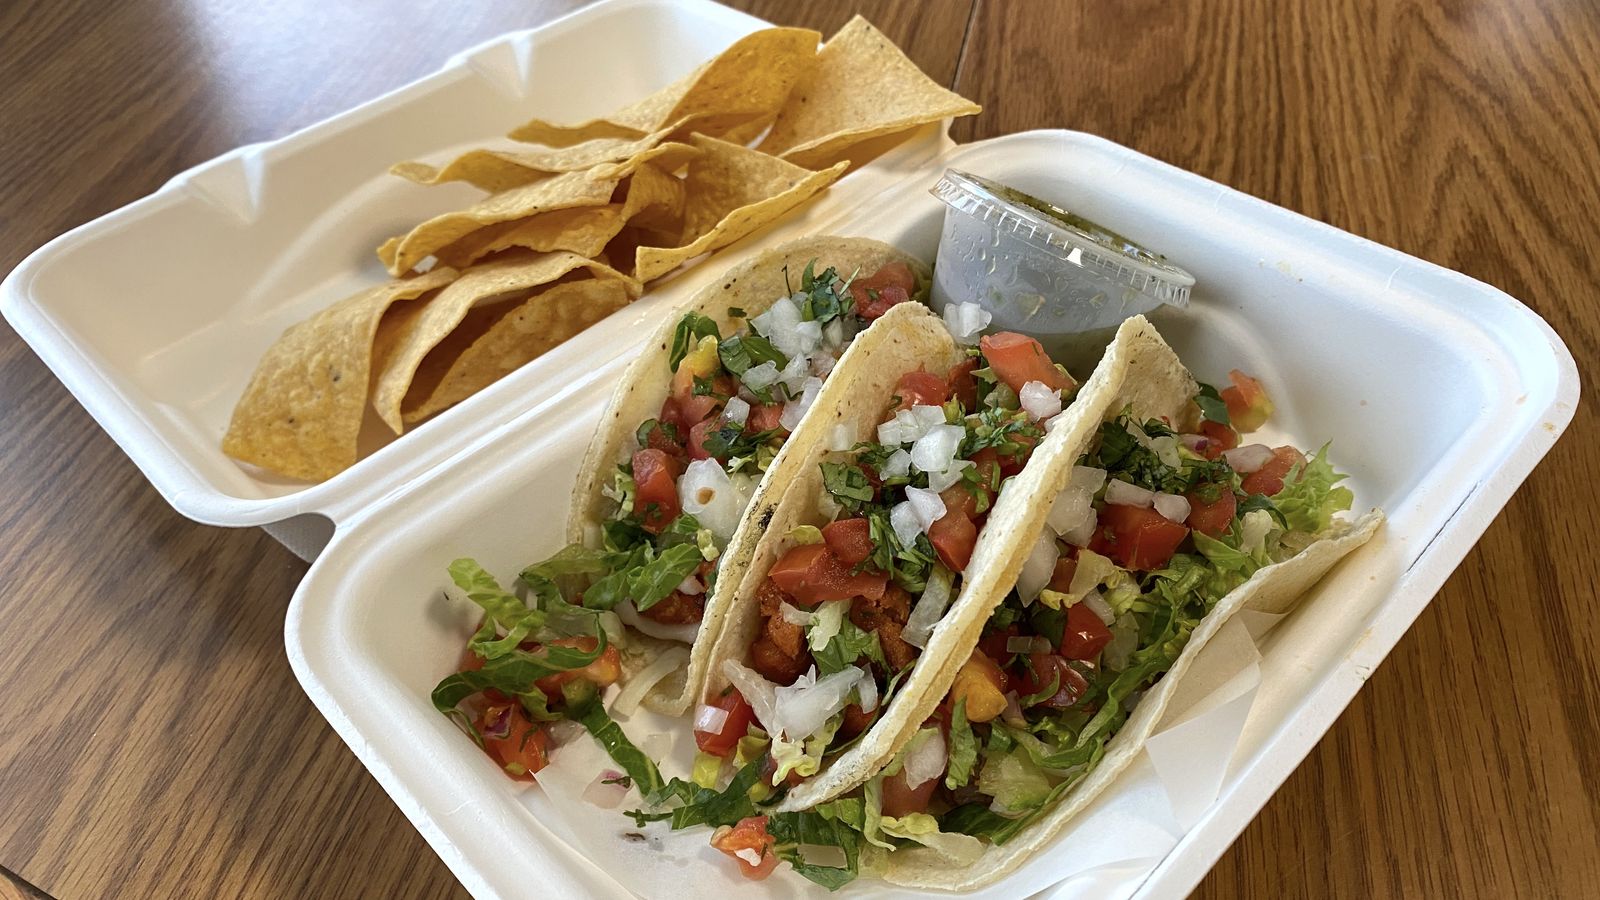 Taco Tuesday Columbus Ohio: A Guide to the Best Tacos in the City